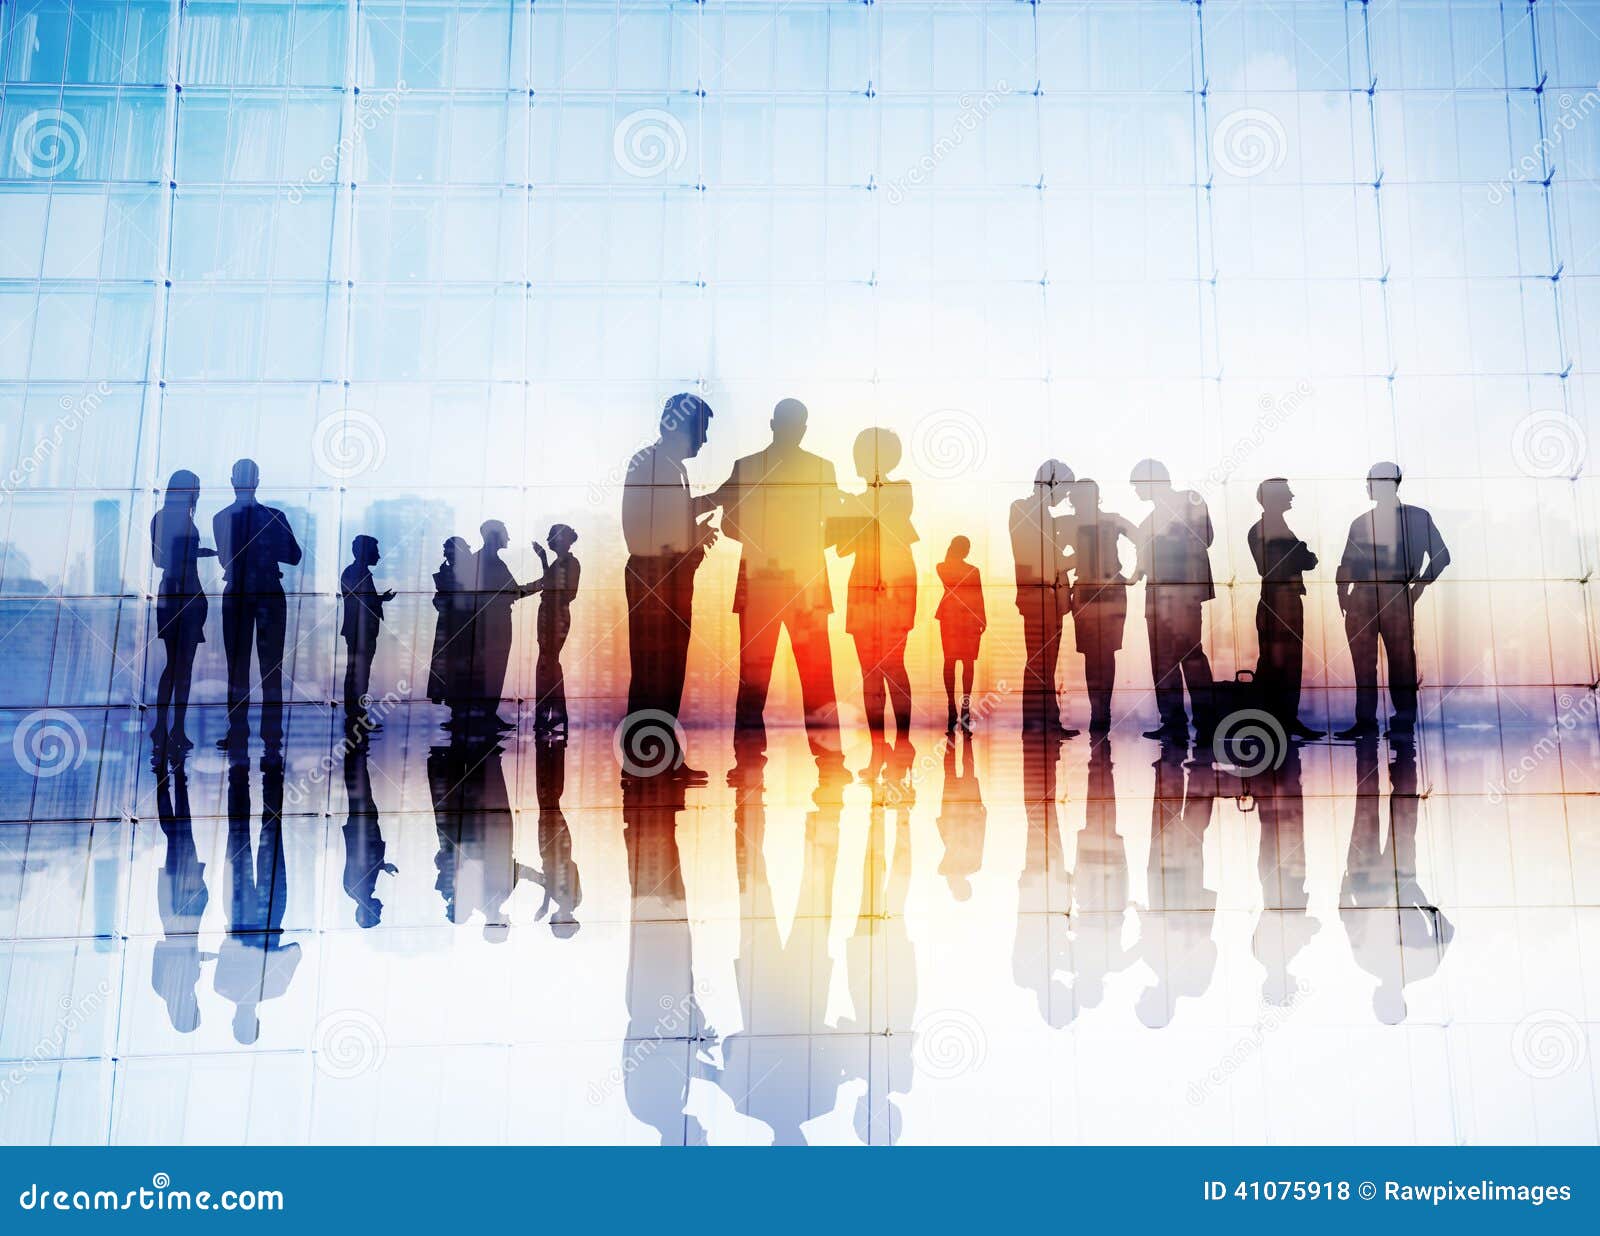 silhouettes of business people discussing outdoors